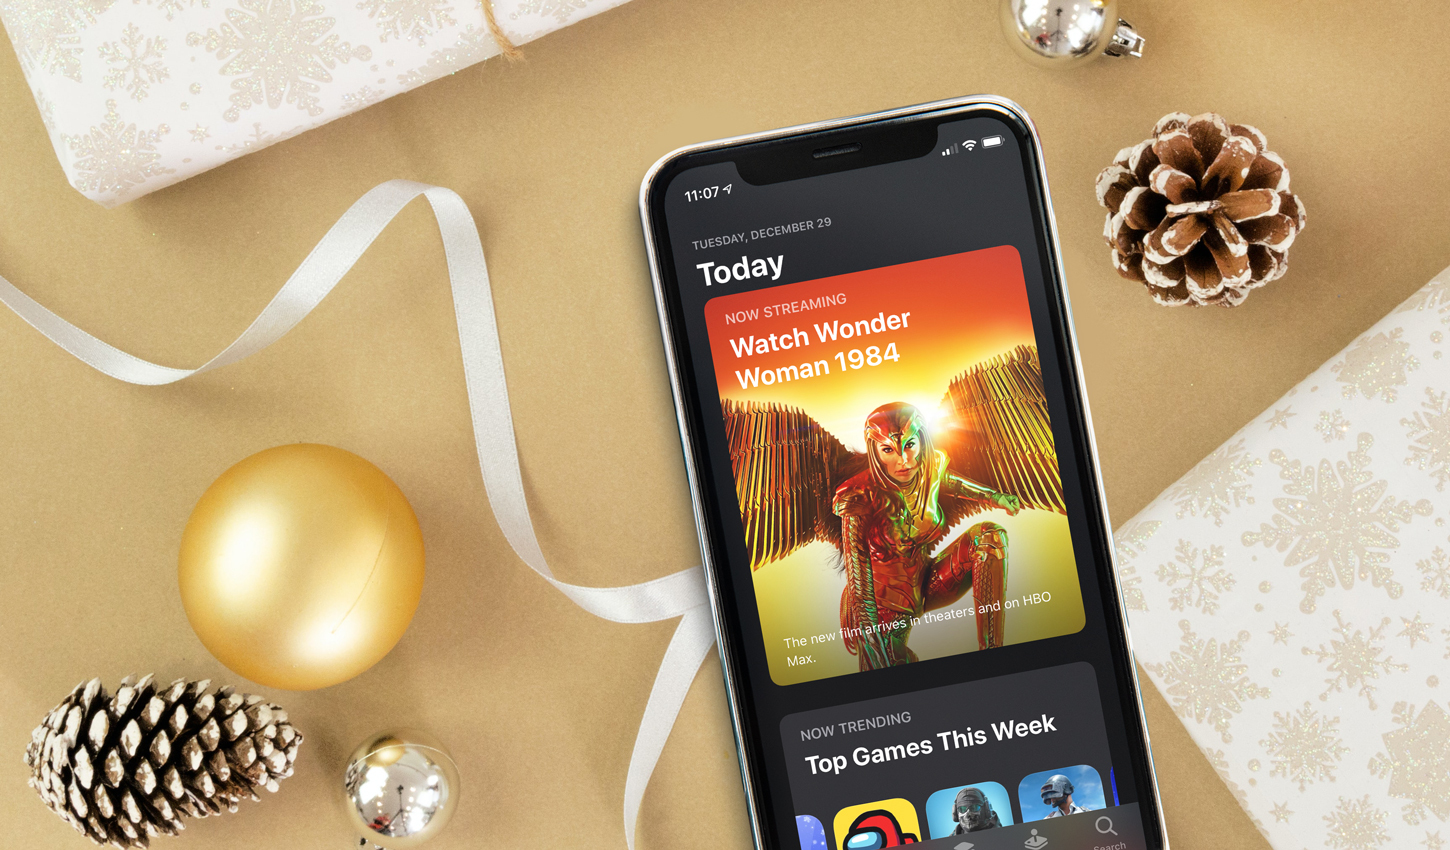 European Mobile App Spending Hit $54.6 Million on Christmas Day, Up 29% from 2019 main image feature